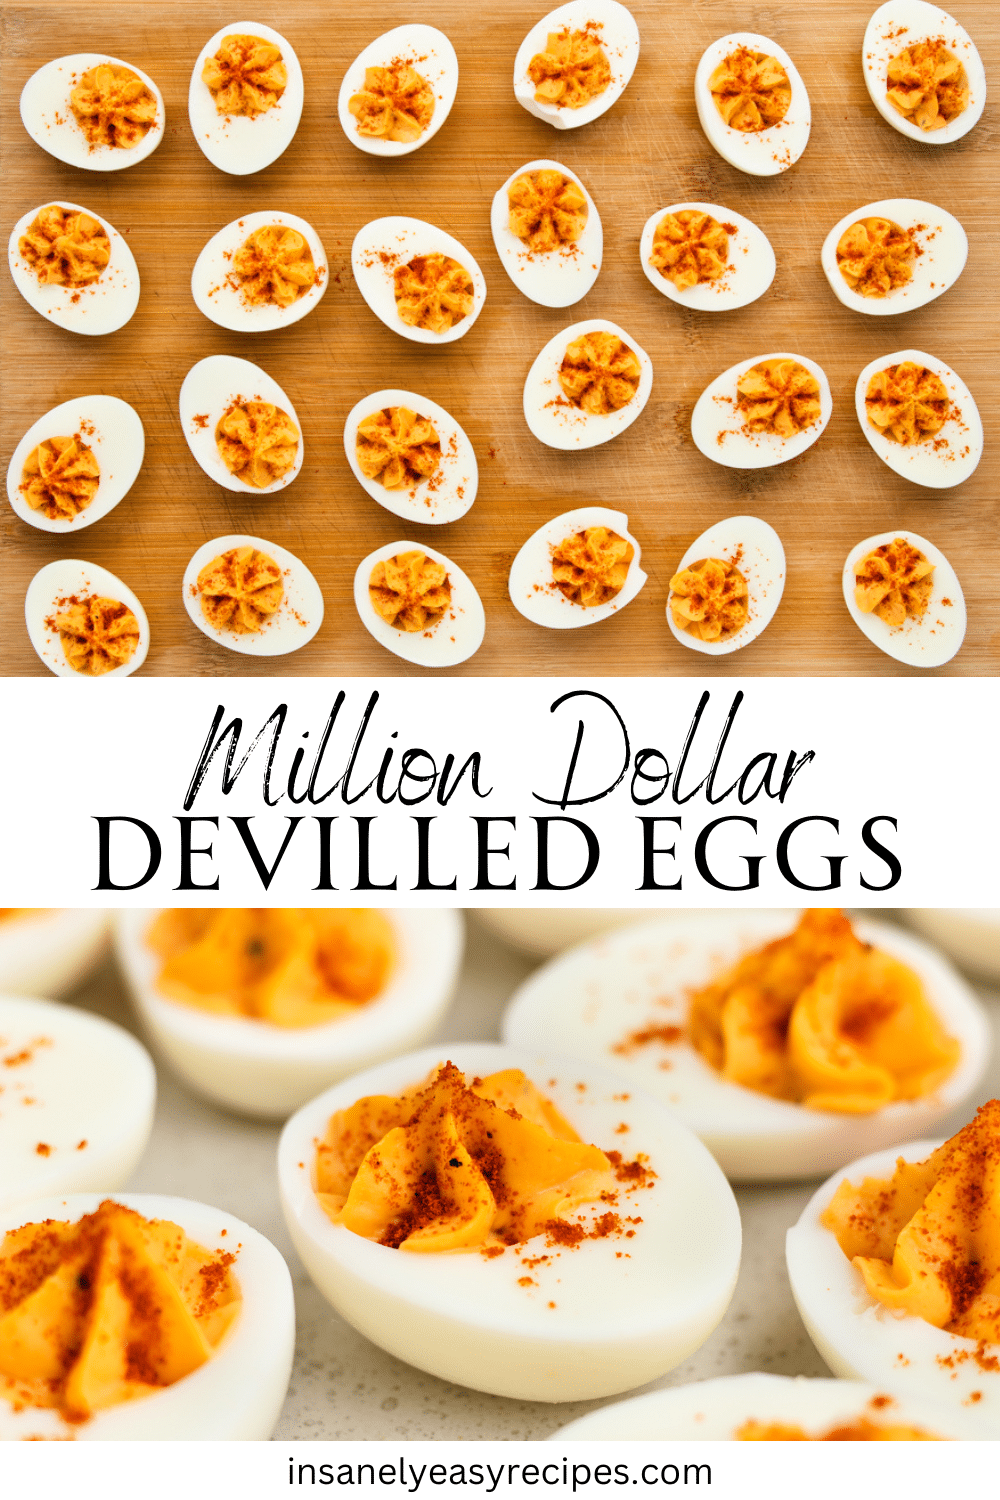 Images of deviled eggs. Text in center says "Million Dollar Devilled Eggs"